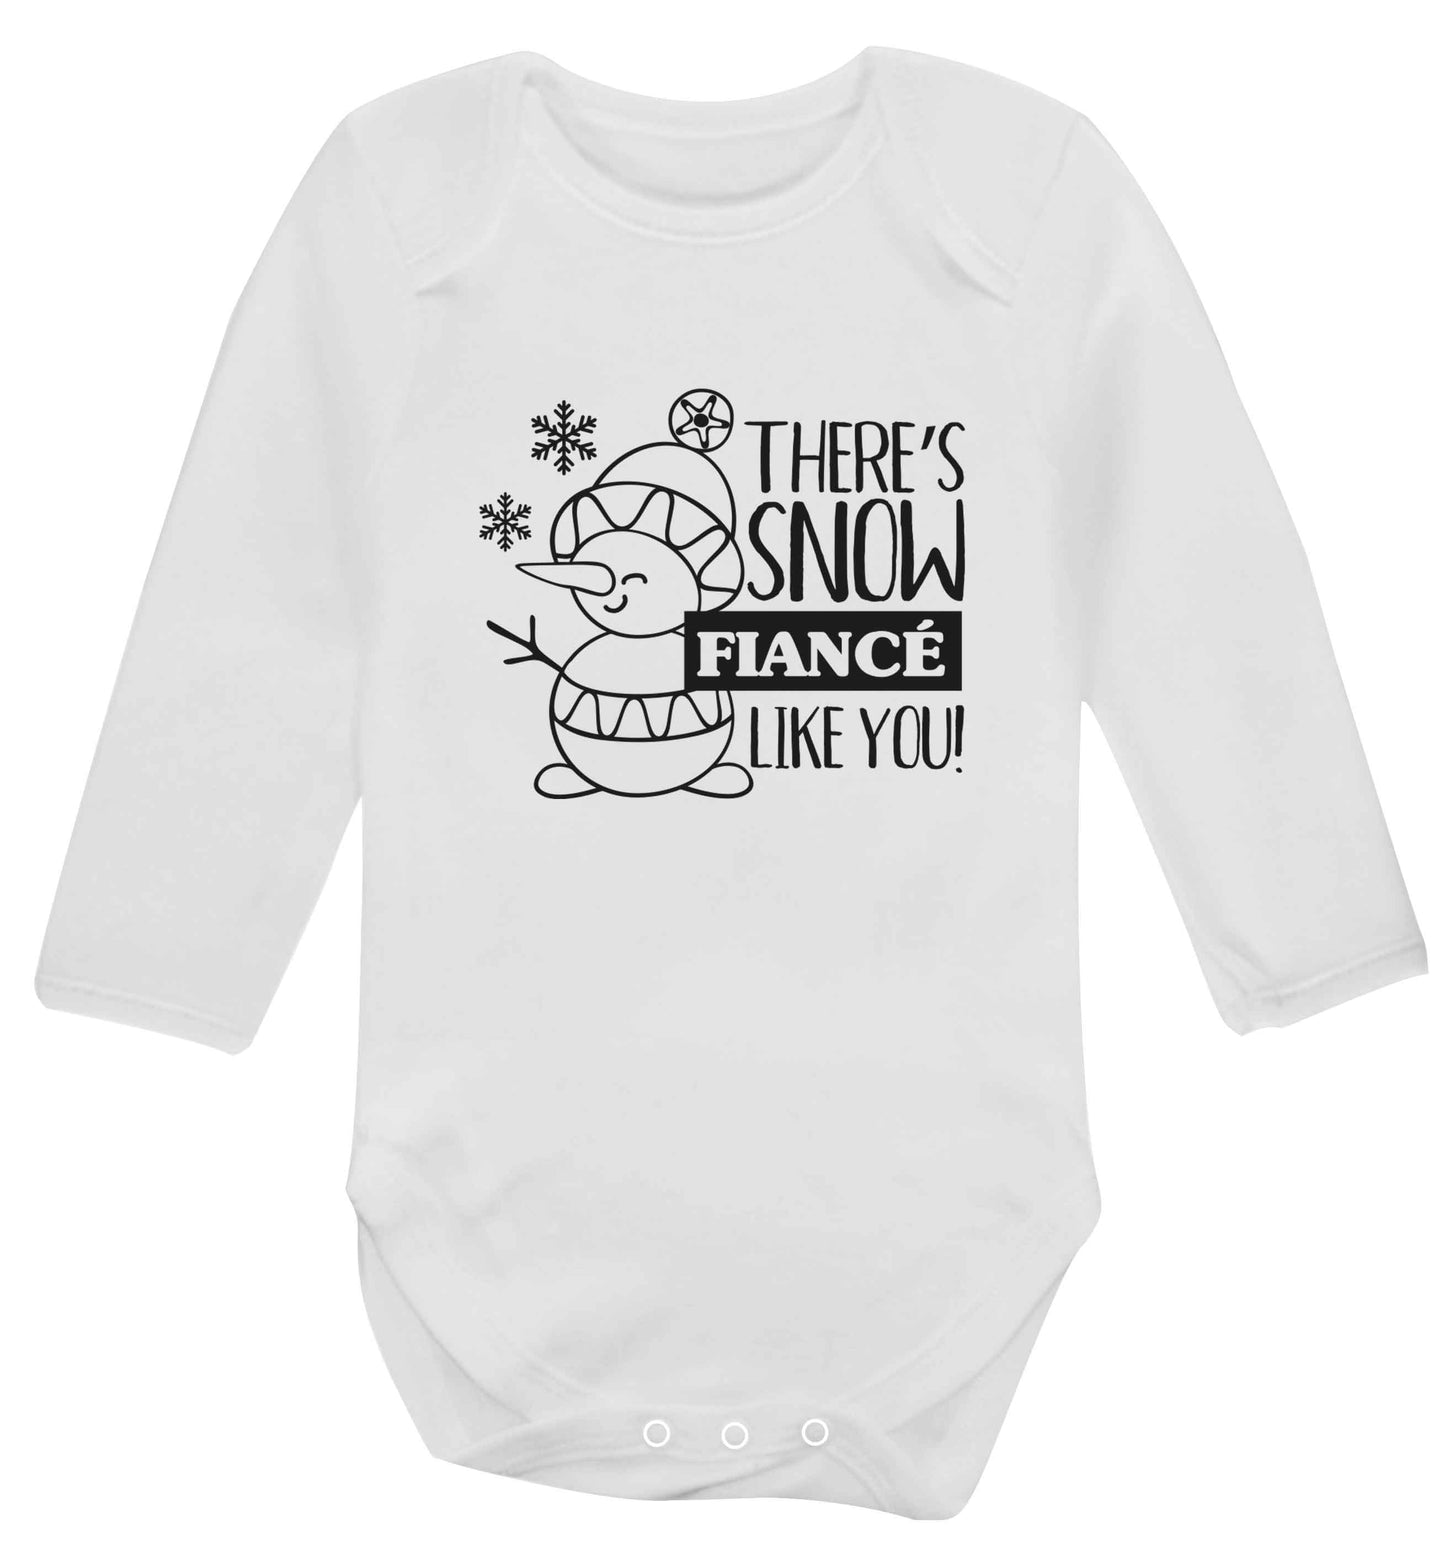 There's snow fiance like you baby vest long sleeved white 6-12 months